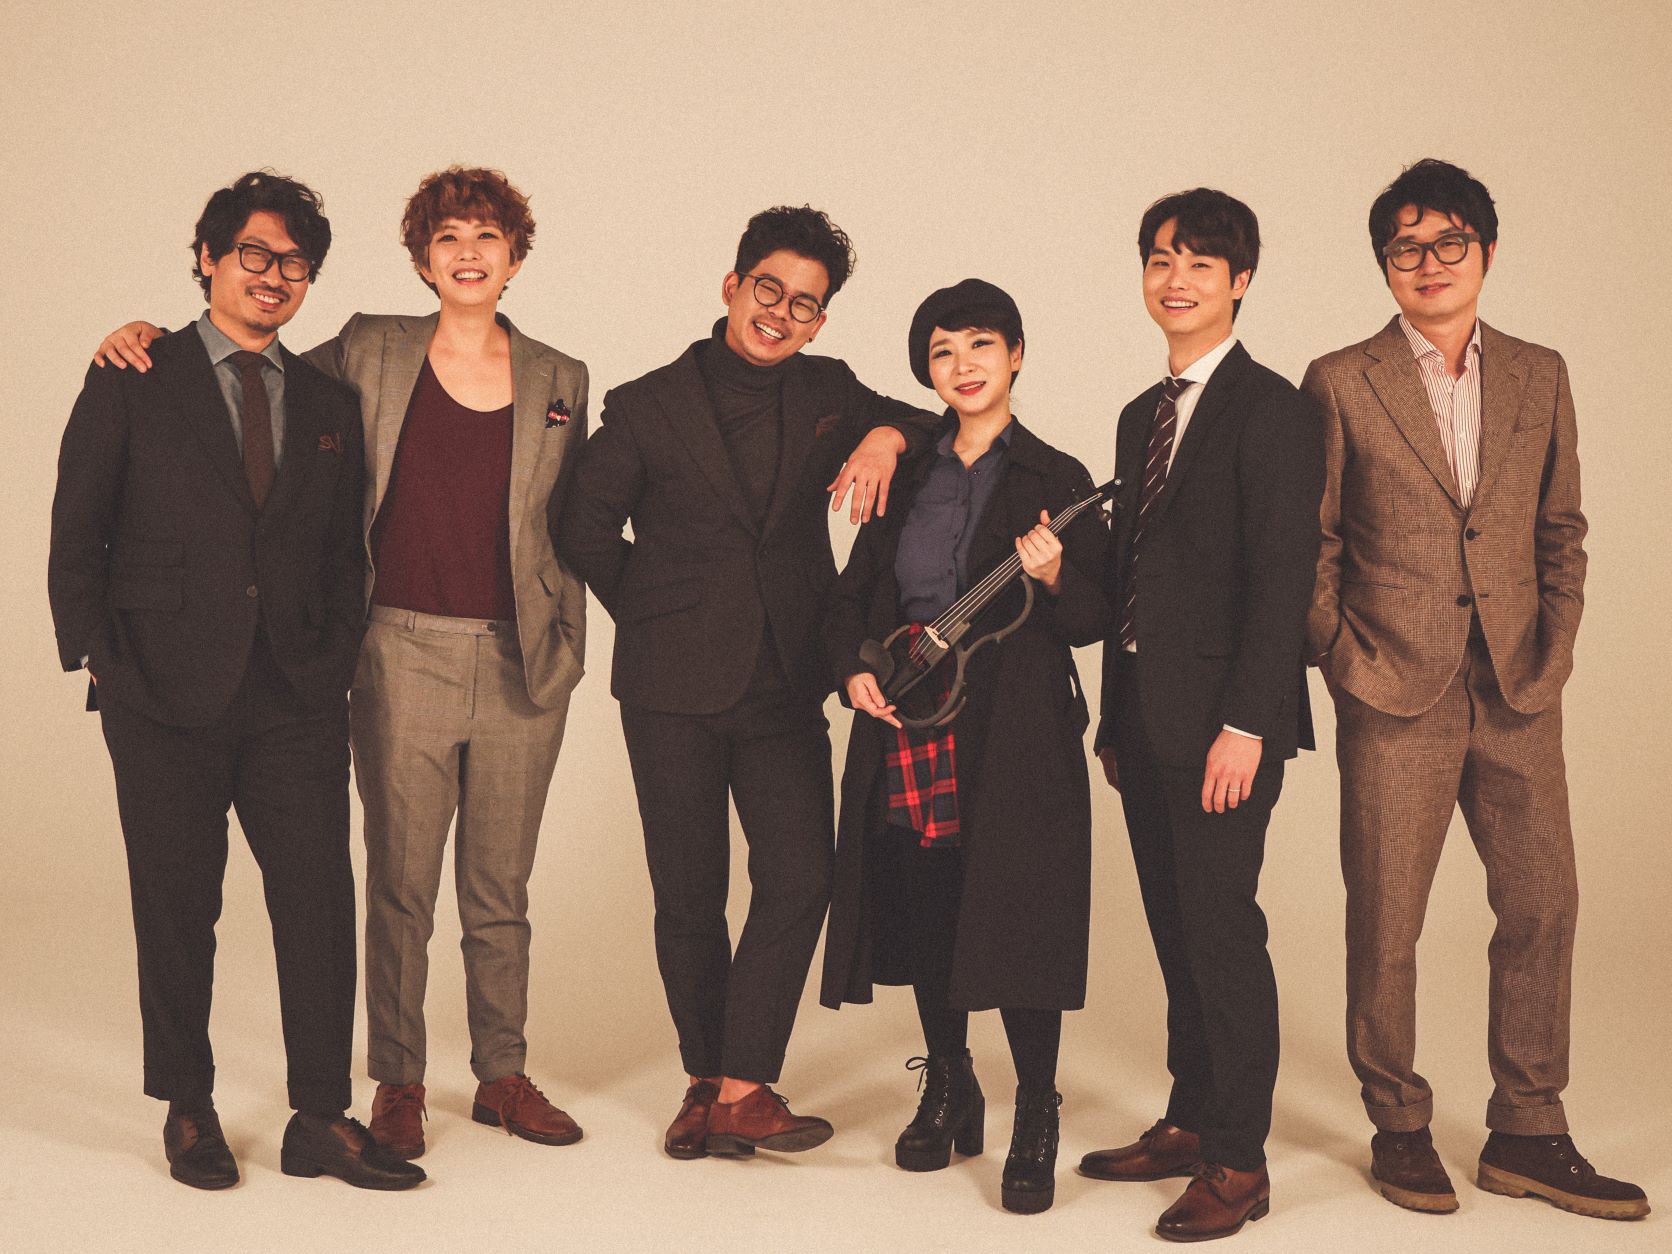 Color photo of 2nd Moon. Six people stand in front of an off-white studio background. They are dressed in a variety of suits and shirts and a woman standing center hold a stringed instrument.